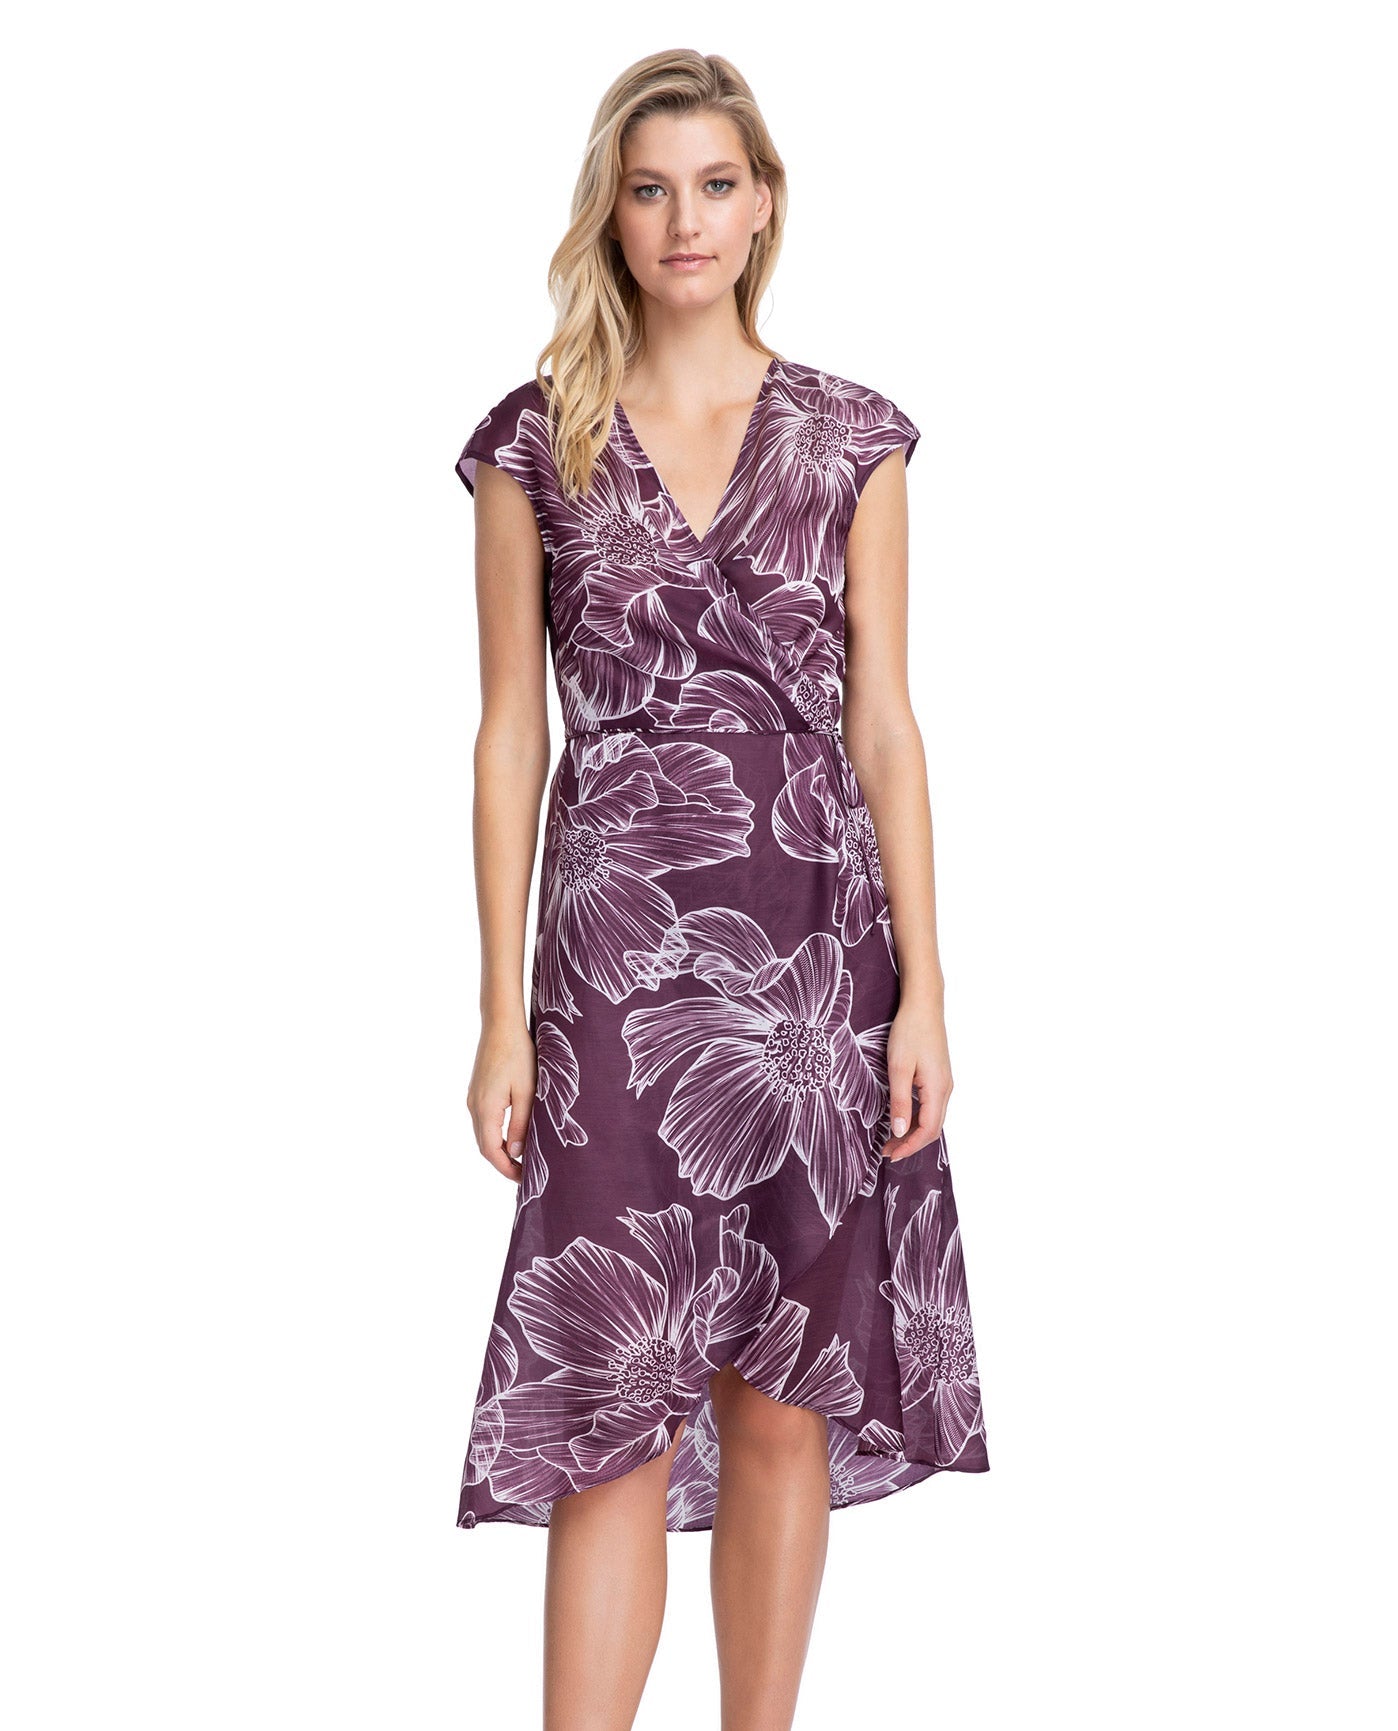 Front View Of Gottex Collection Lily Tie Front Long Surplice Wrap Cover Up Dress | Gottex Lily Wine